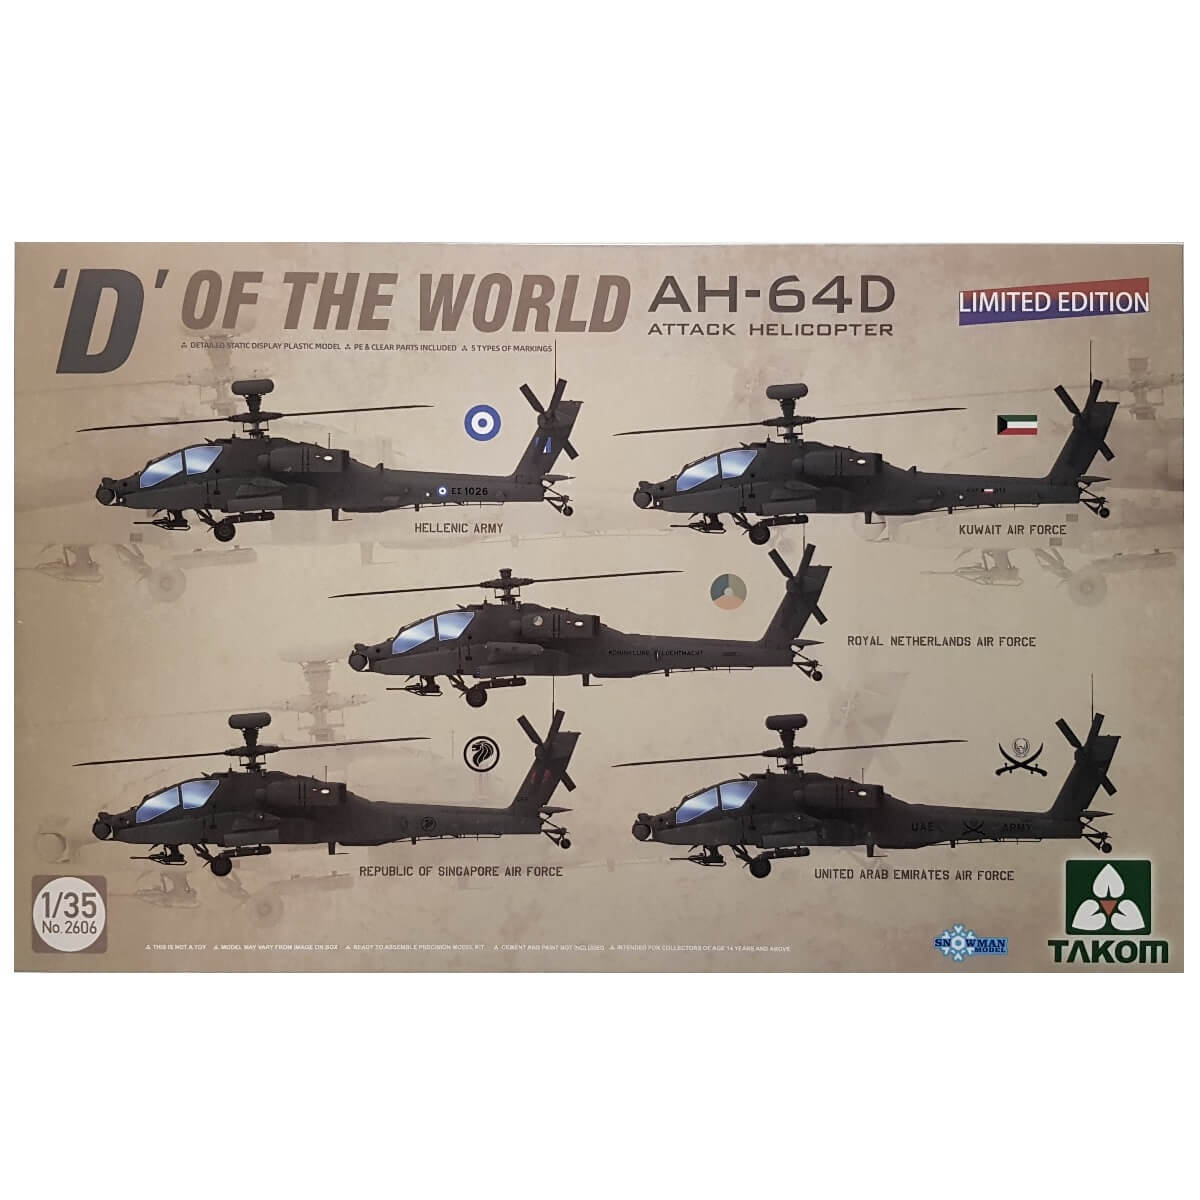 1:35 AH-64D Attack Helicopter - D of the World - TAKOM